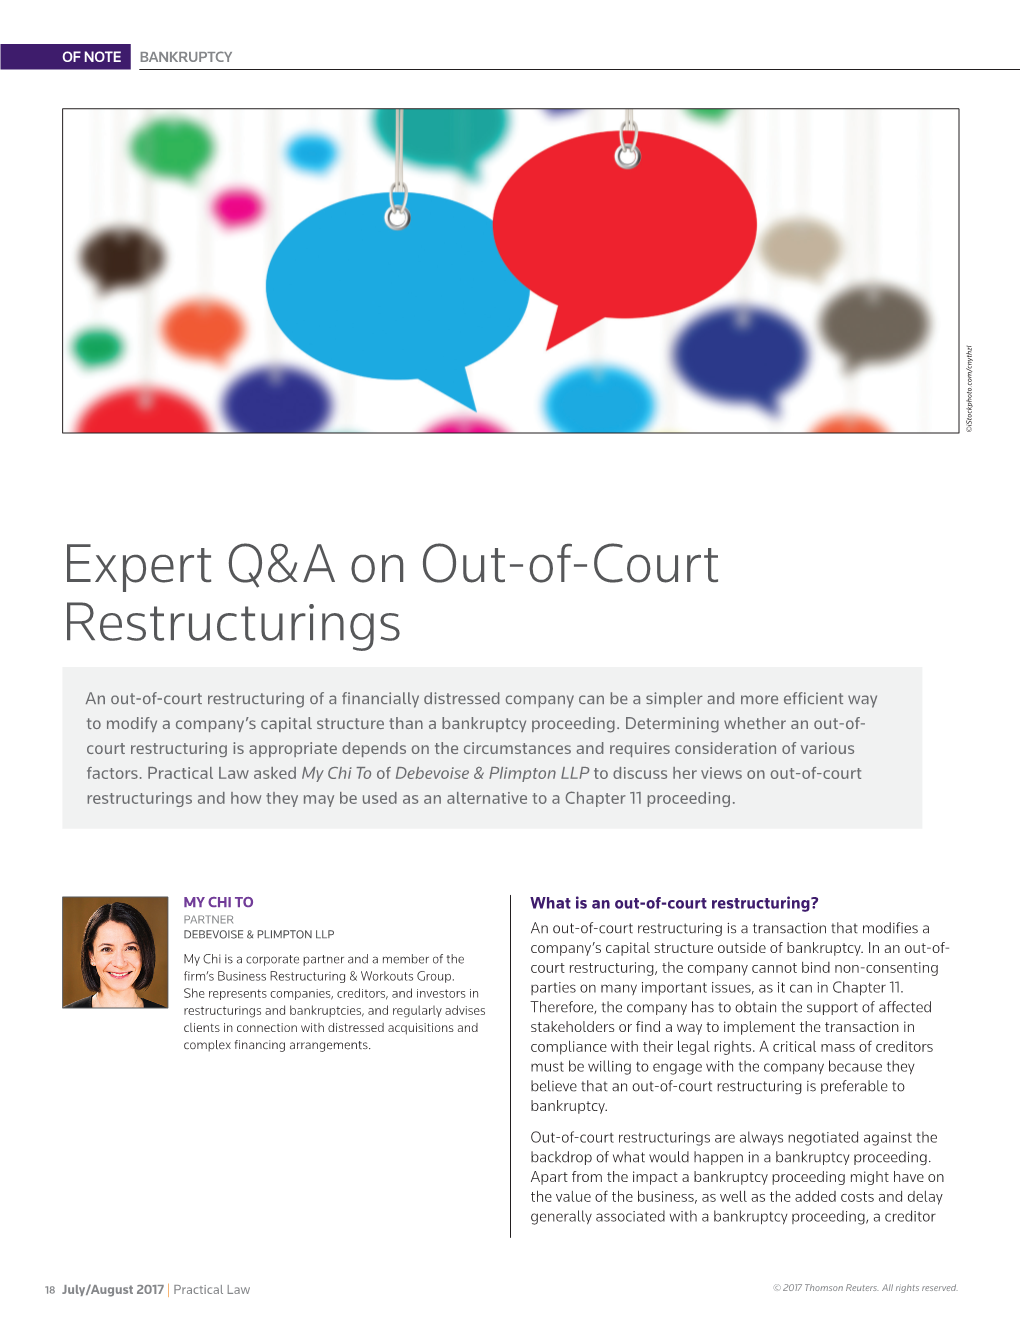 Expert Q&A on Out-Of-Court Restructurings